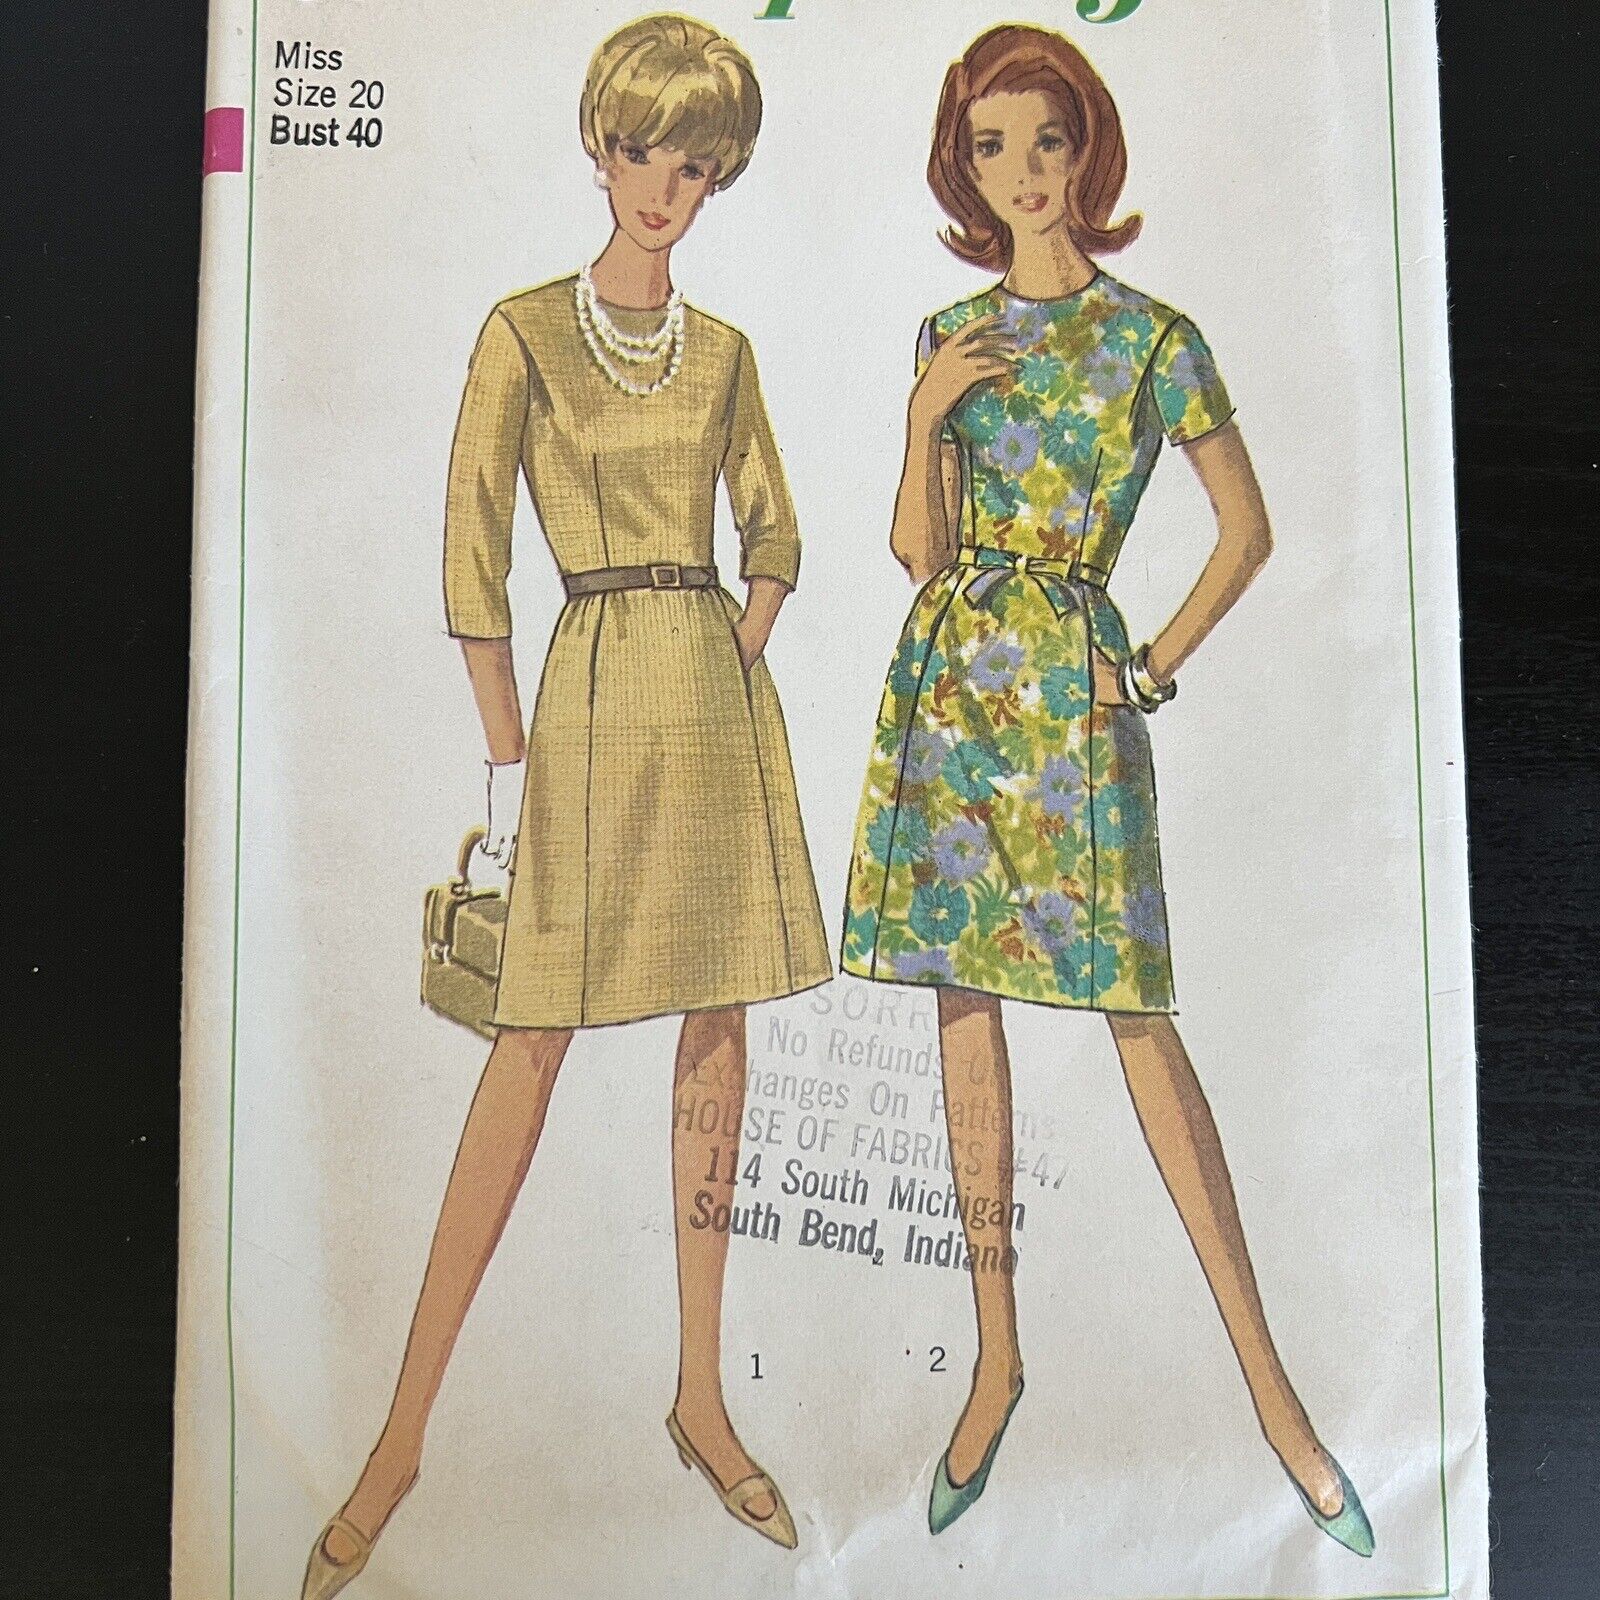 Vintage 1960s Simplicity 6892 Mod MCM Soft Pleated Dress Sewing Pattern 20 CUT